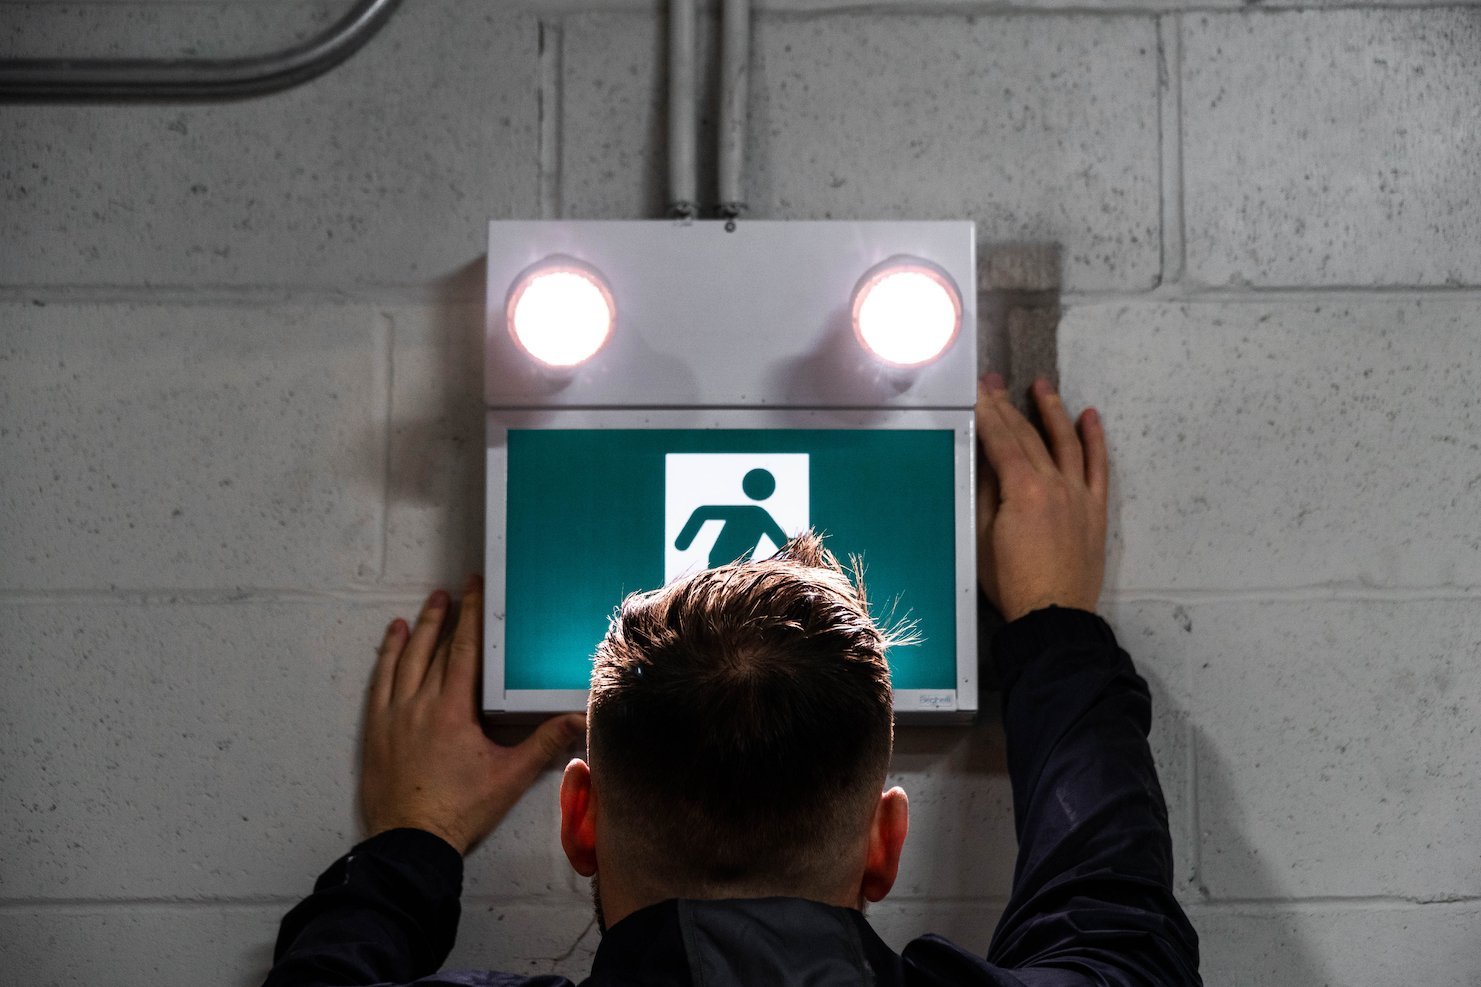 Who Can Test Emergency Lighting?